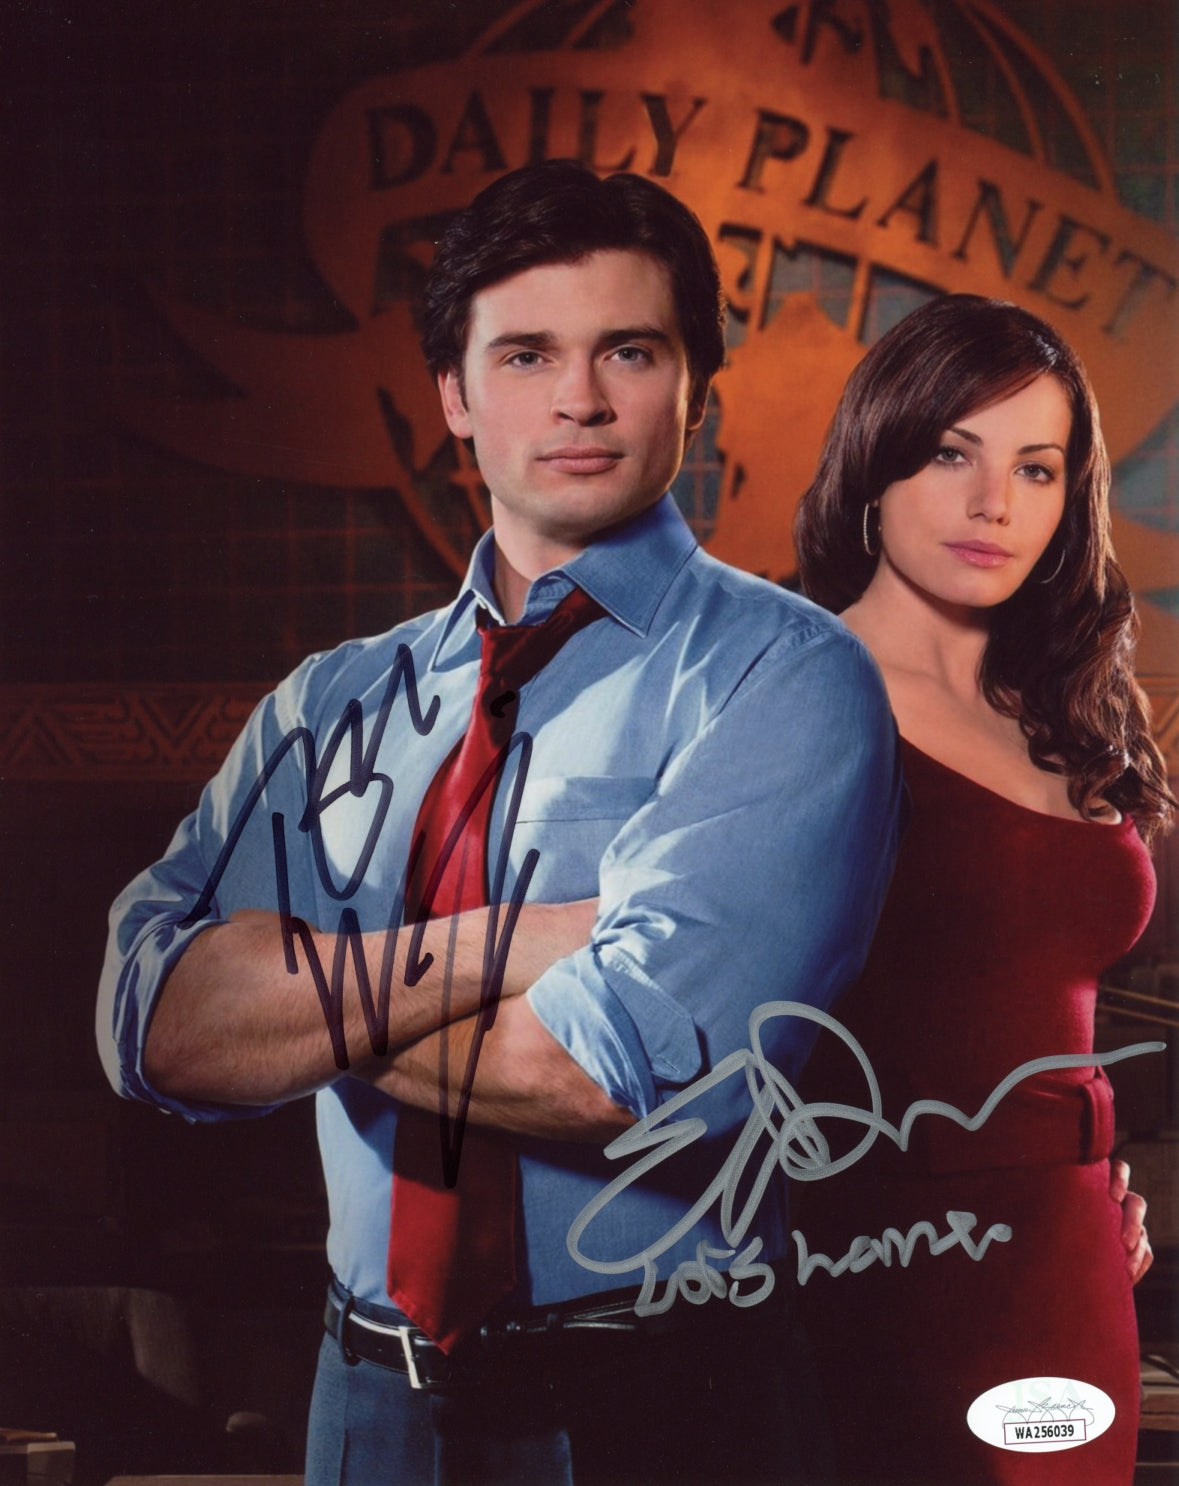 Smallville 8x10 Signed Photo Durance Welling JSA Certified Autograph